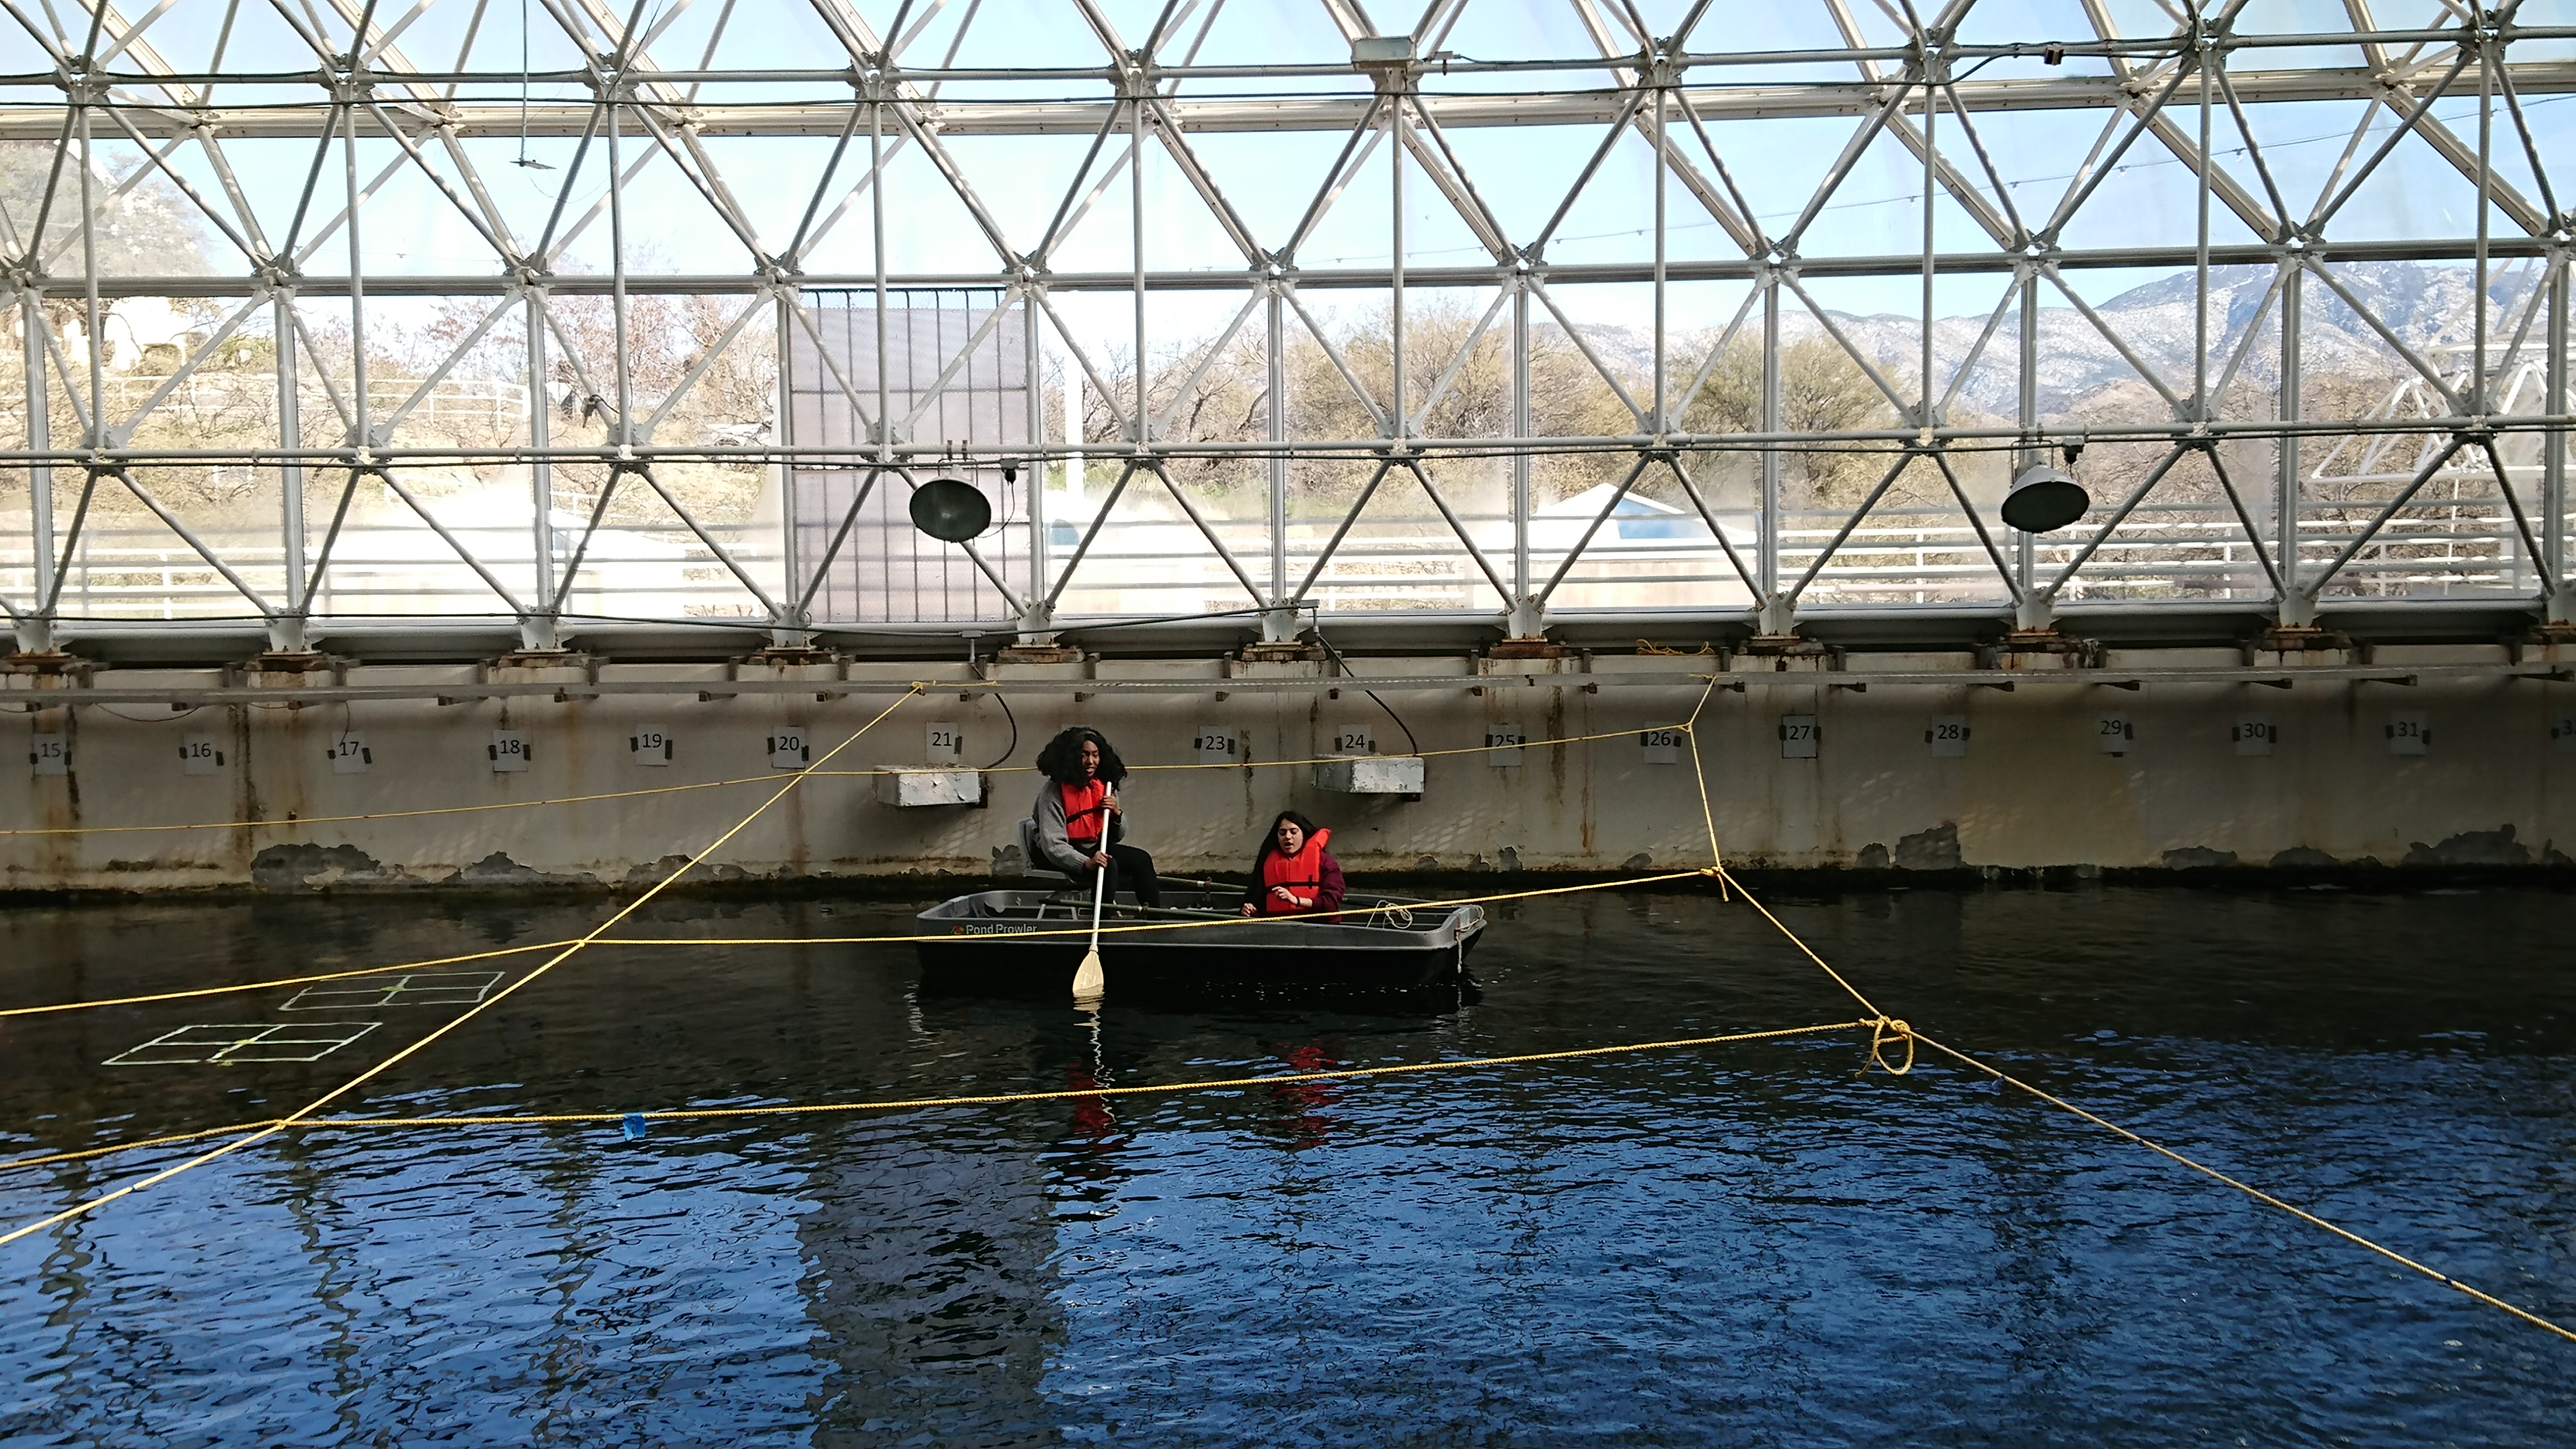 Cathryn Sephus and Alexus Cazares in a boat on the ocean at Biosphere 2